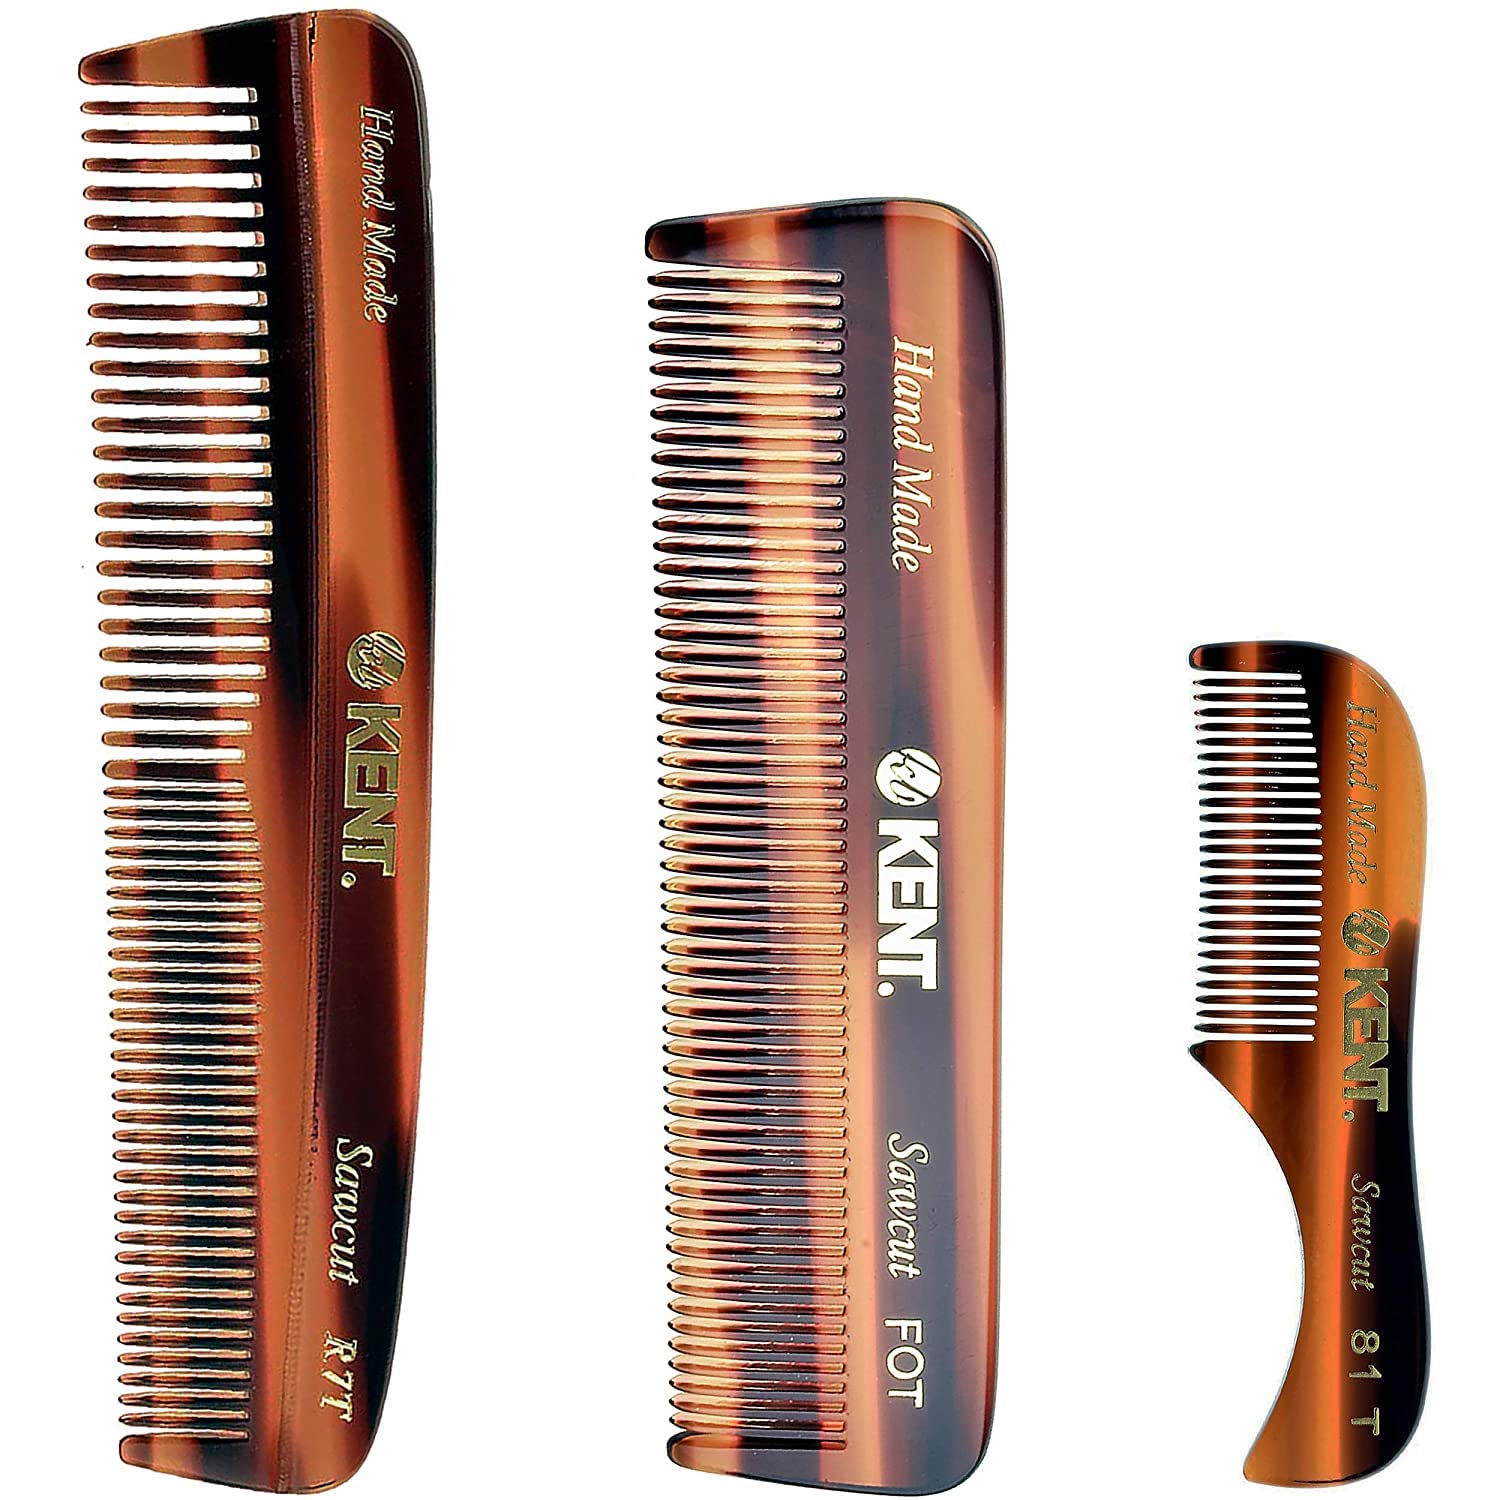 Kent Handmade Coarse and Fine Toothed Pocket Combs